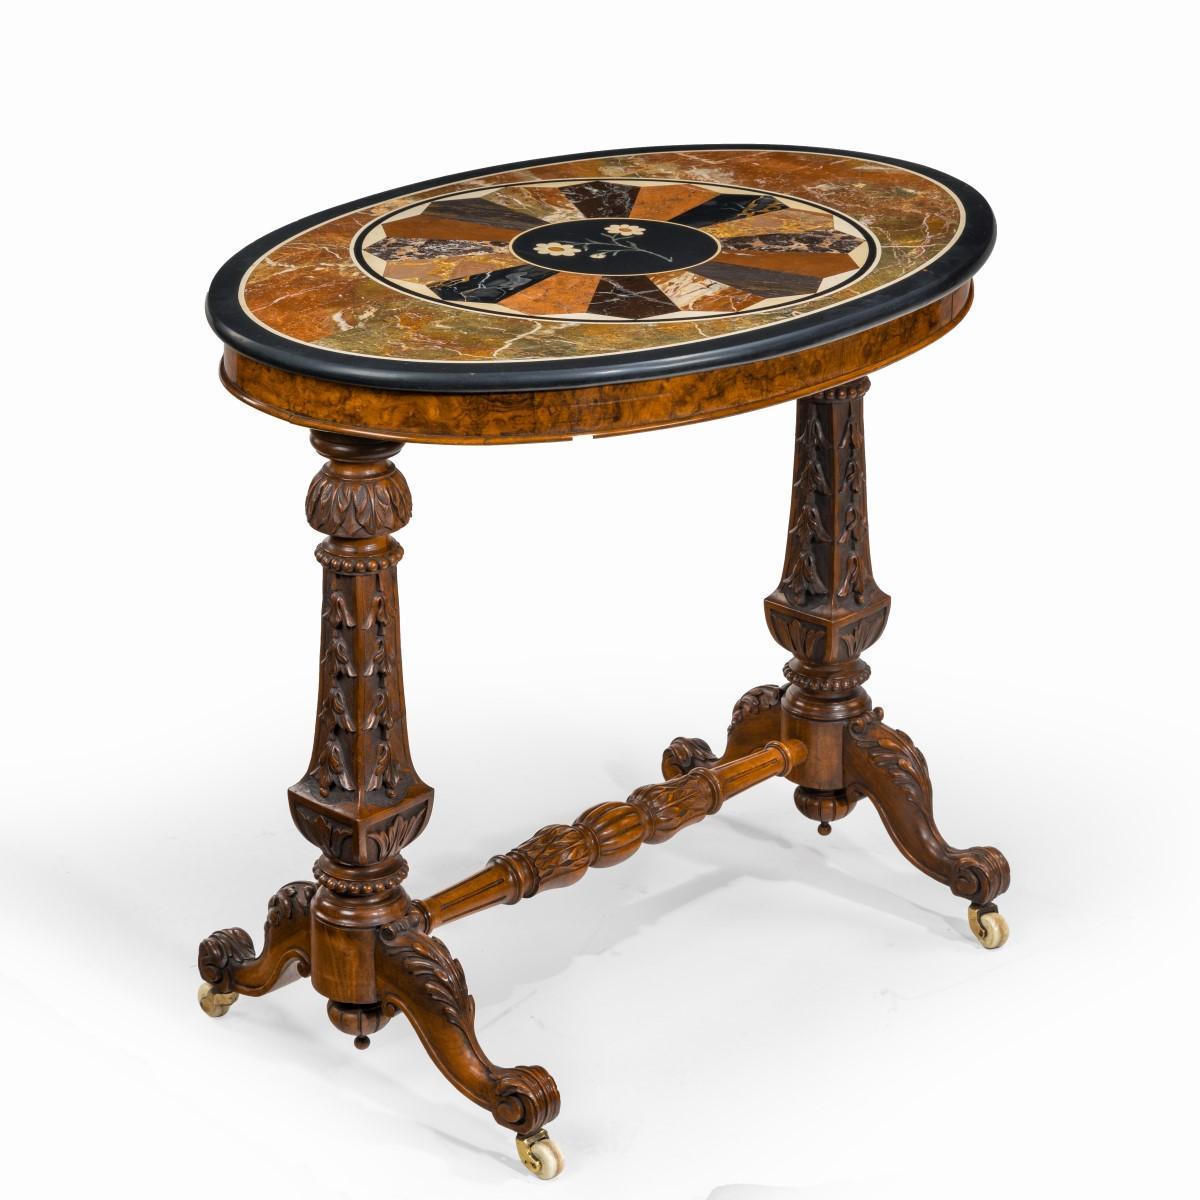 A mid-Victorian walnut and Pietra Dura table, the oval top inlaid in specimen marbles with a roundel of radiating panels centred on a white daisy in on a black ground, all raised on flared square-section supports joined by a turned and gadrooned